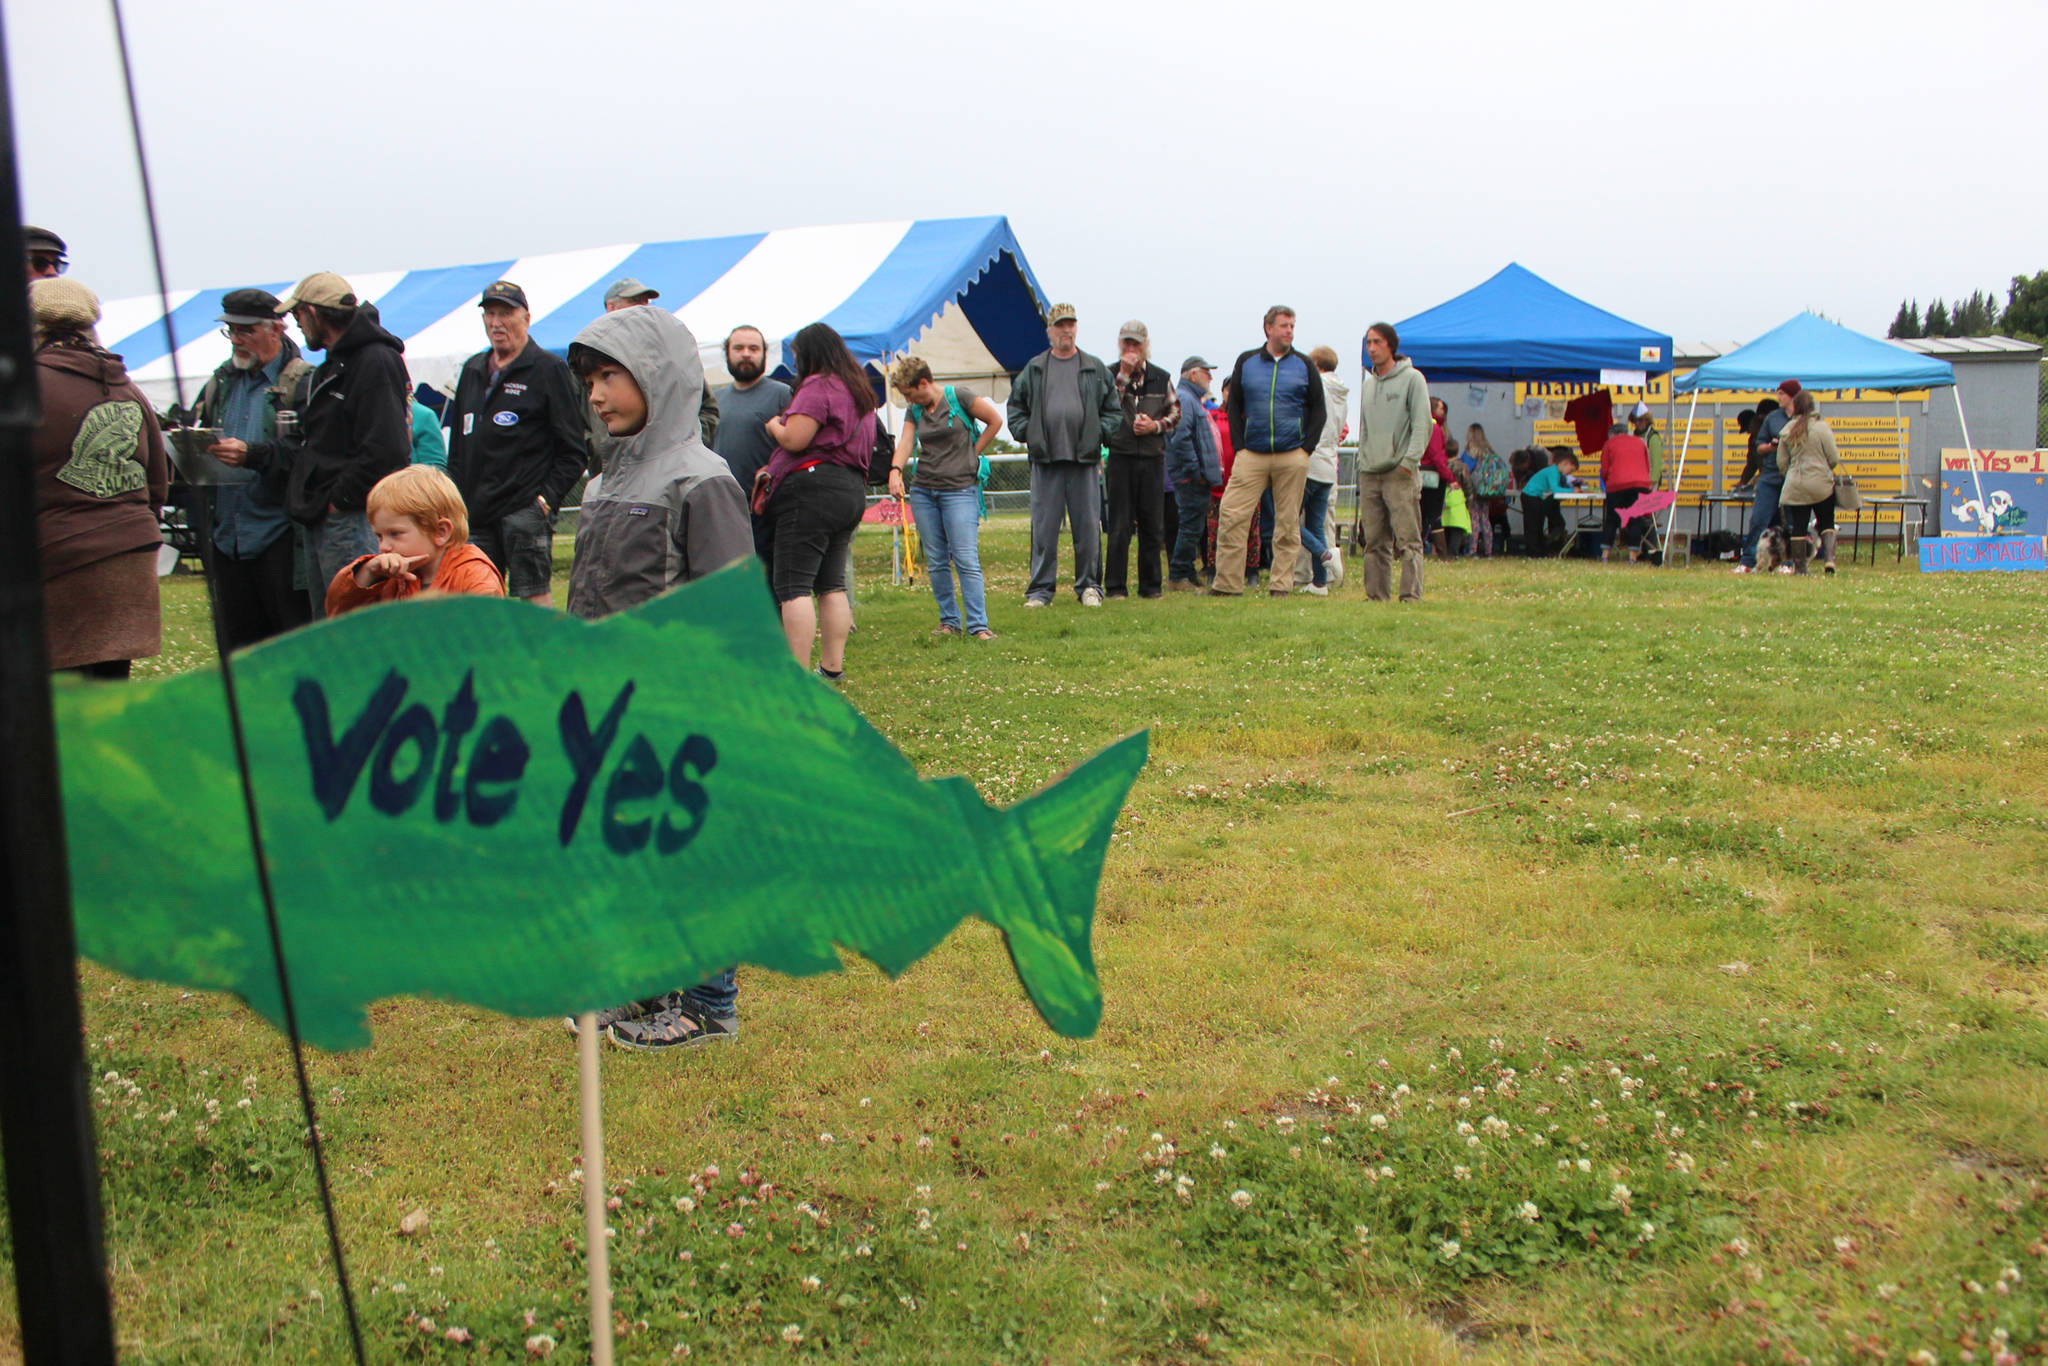 Area residents wait in line for some salmon at a barbecue held Friday, Aug. 10, 2018 for Alaska Wild Salmon Day in Karen Hornaday Park in Homer, Alaska. (Photo by Megan Pacer/Homer News)